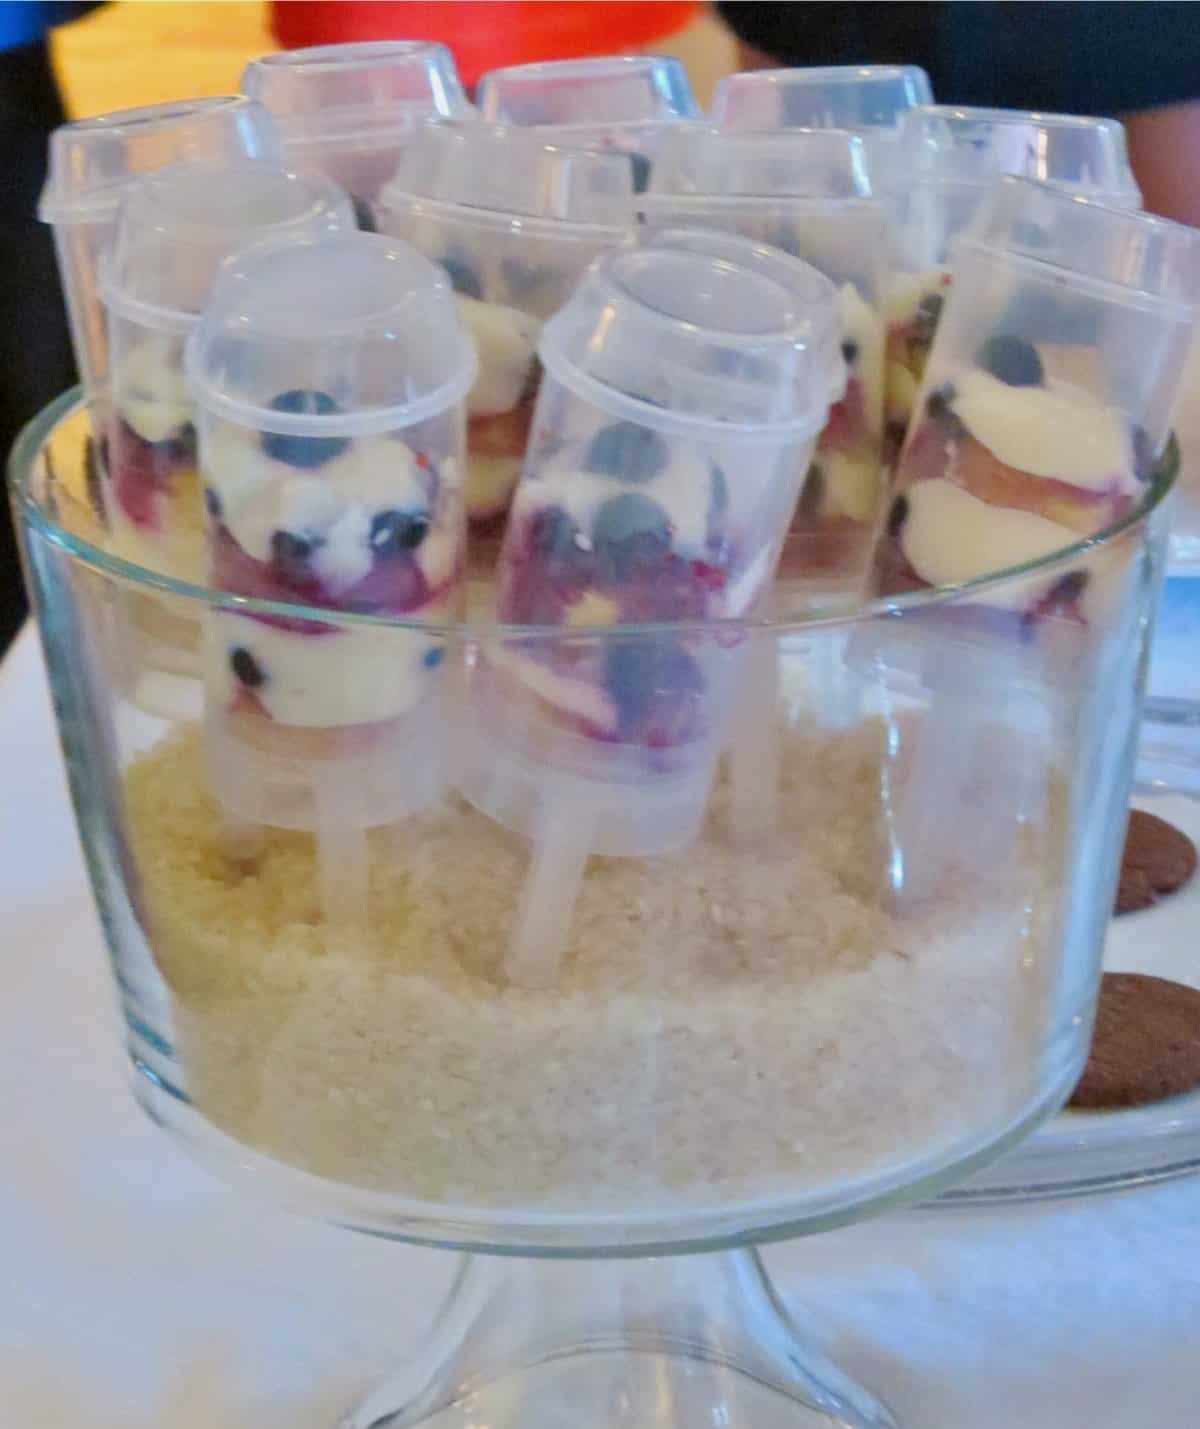 Berry mascarpone push up pops standing in a trifle bowl filled with rice.